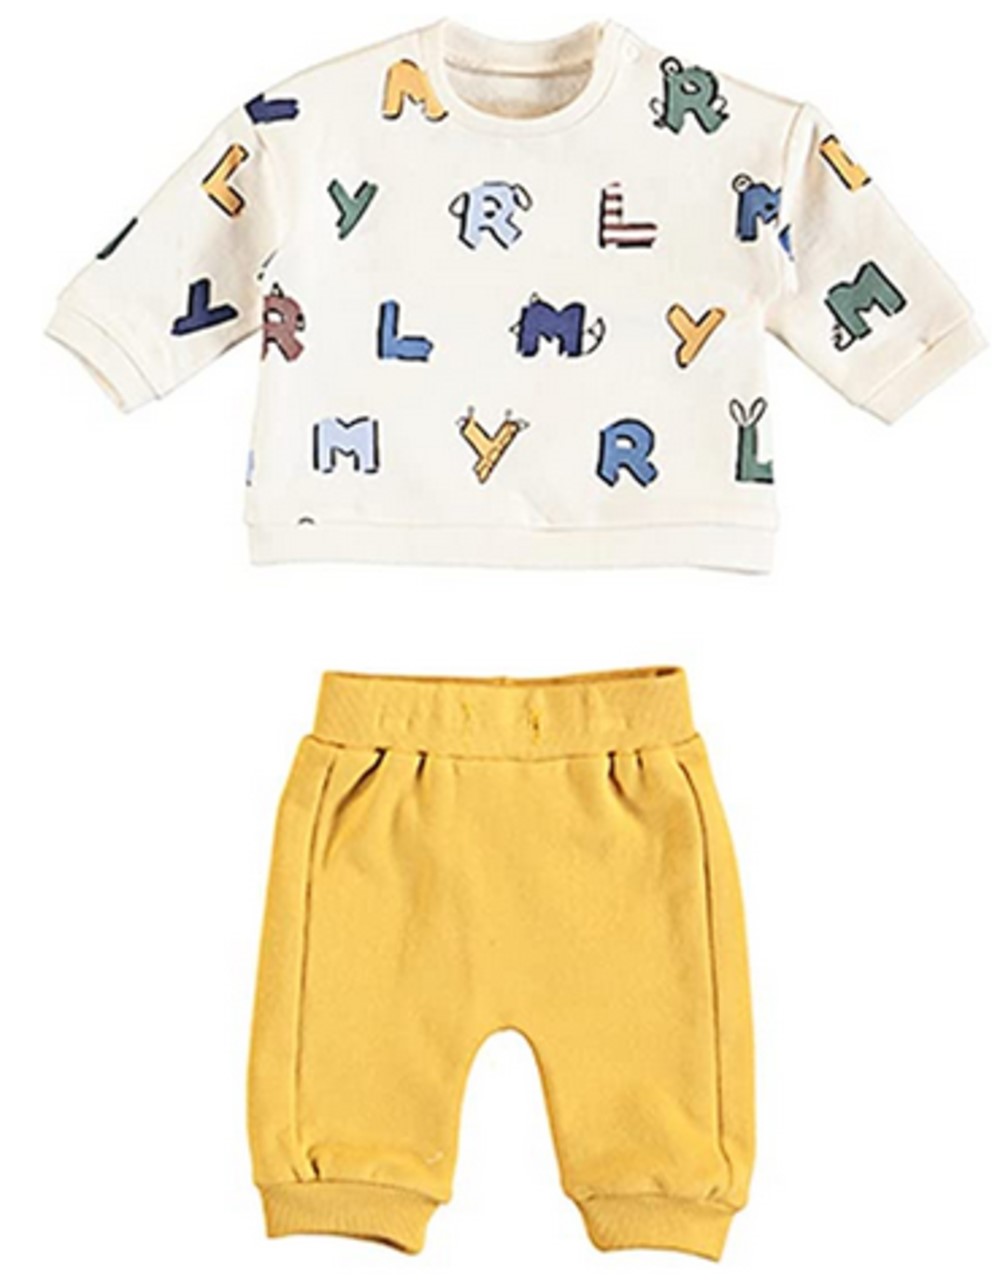 MAYORAL BABY BOYS FALL OUTFIT PANTS AND TOP SET (ALPHABET GOLD)